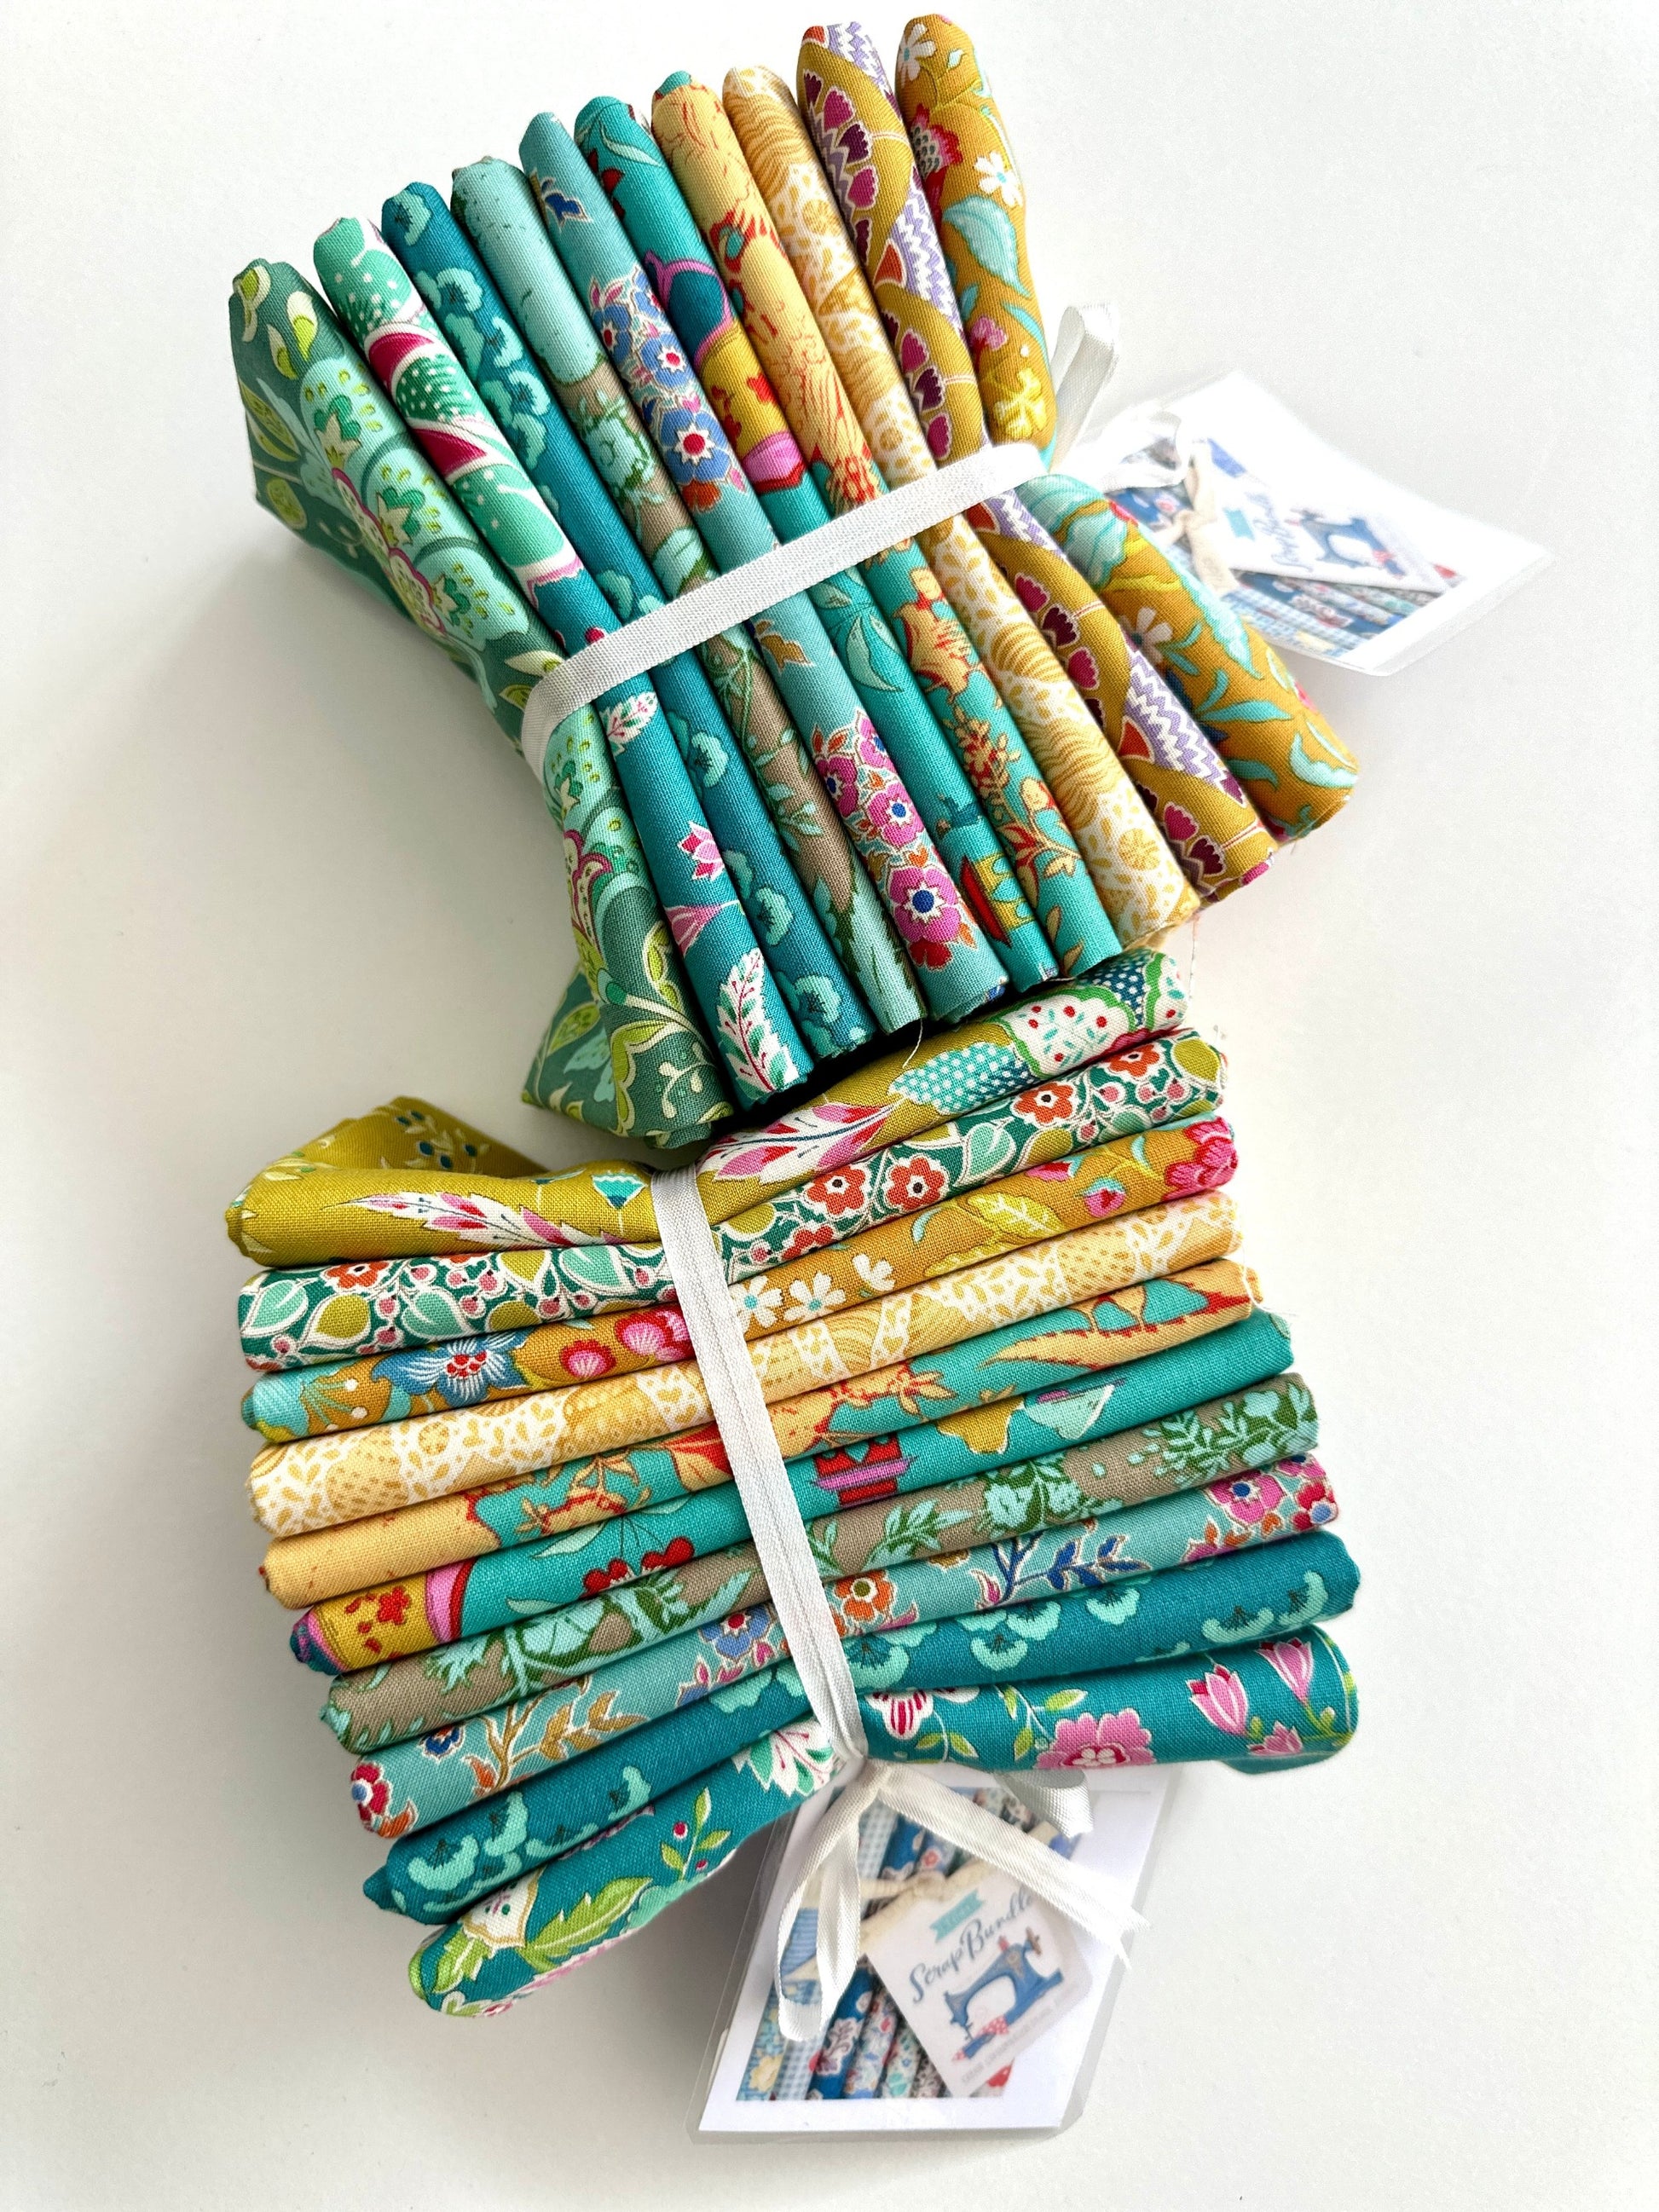 teal green yellow bundle Tilda scrap curated scrap collections past and present available at 2 sew textiles art quilt supplies